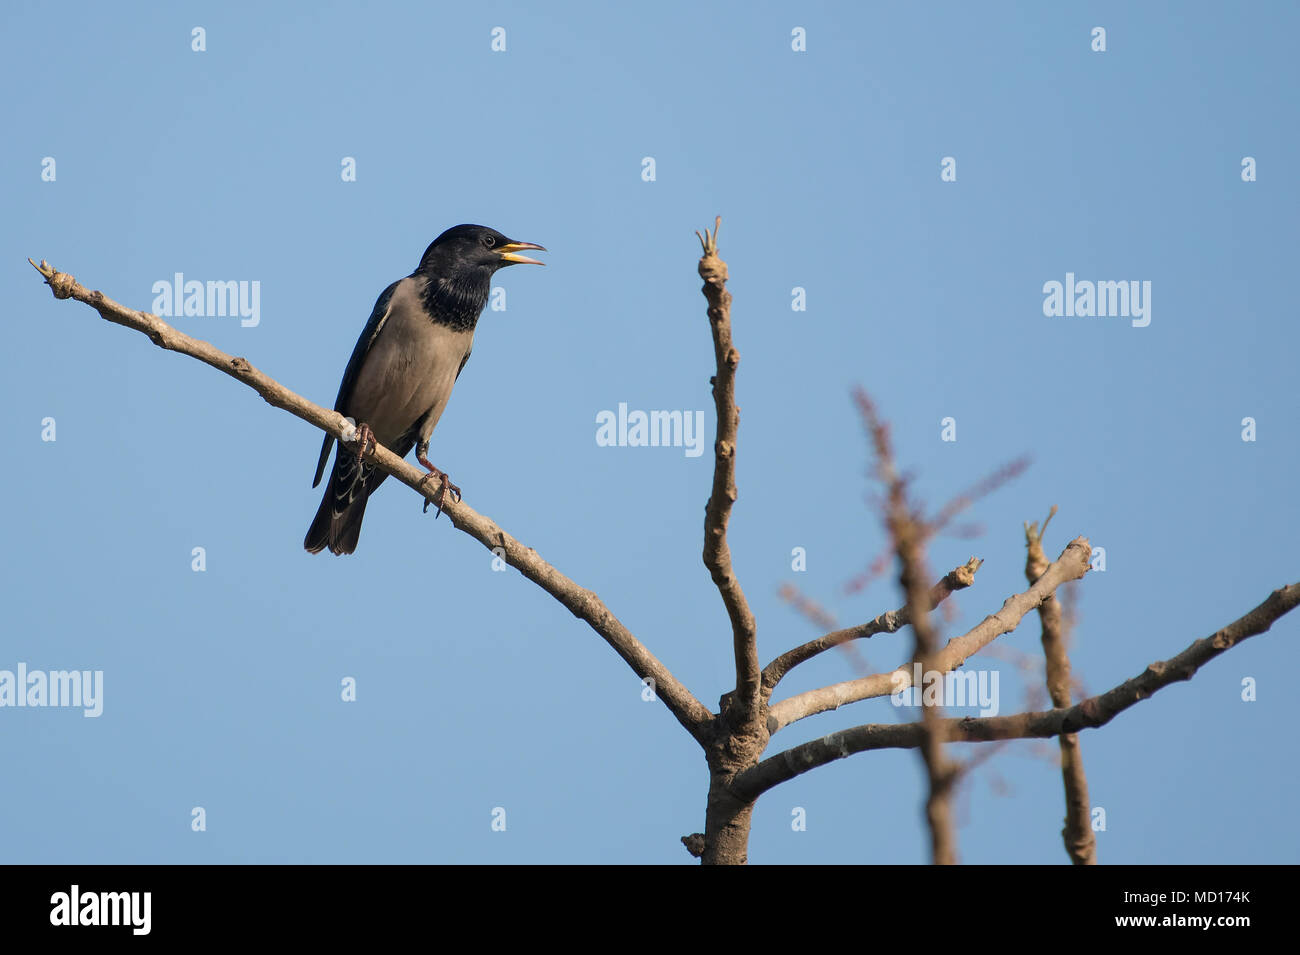 Bird: Portrait of a Singing Male Rosy Starling Perched on a Tree Branch Stock Photo